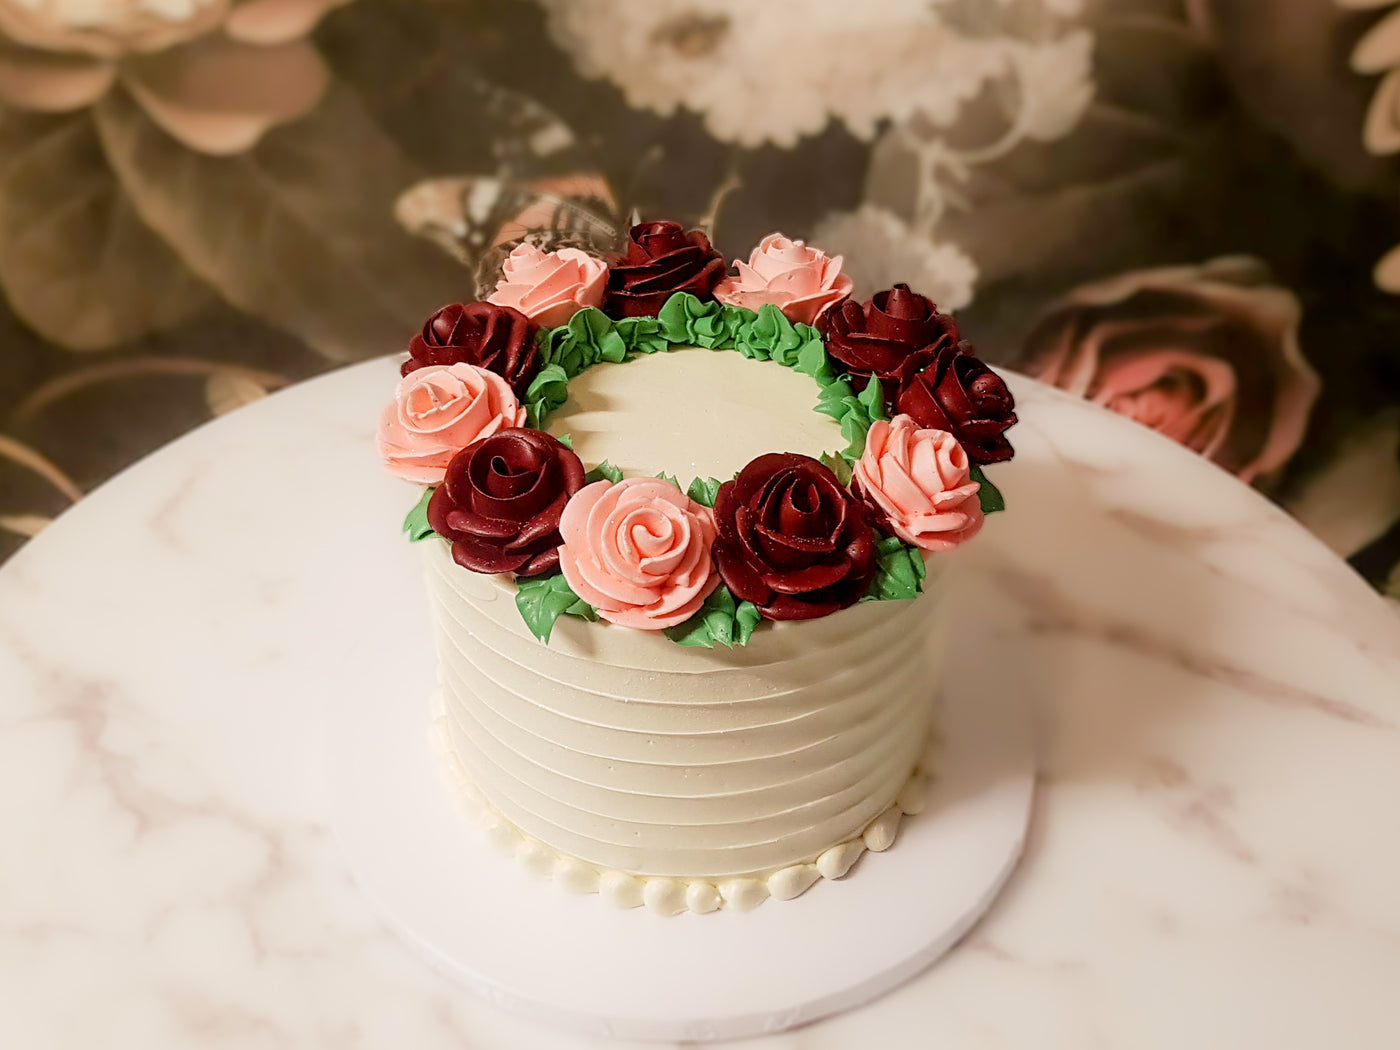 Large roses arranged in a wreath on your cake to create a rustic bohemian vibe- both simple and elegant.  A great centerpiece for your party.  Customize: Flower colors, size, flavor